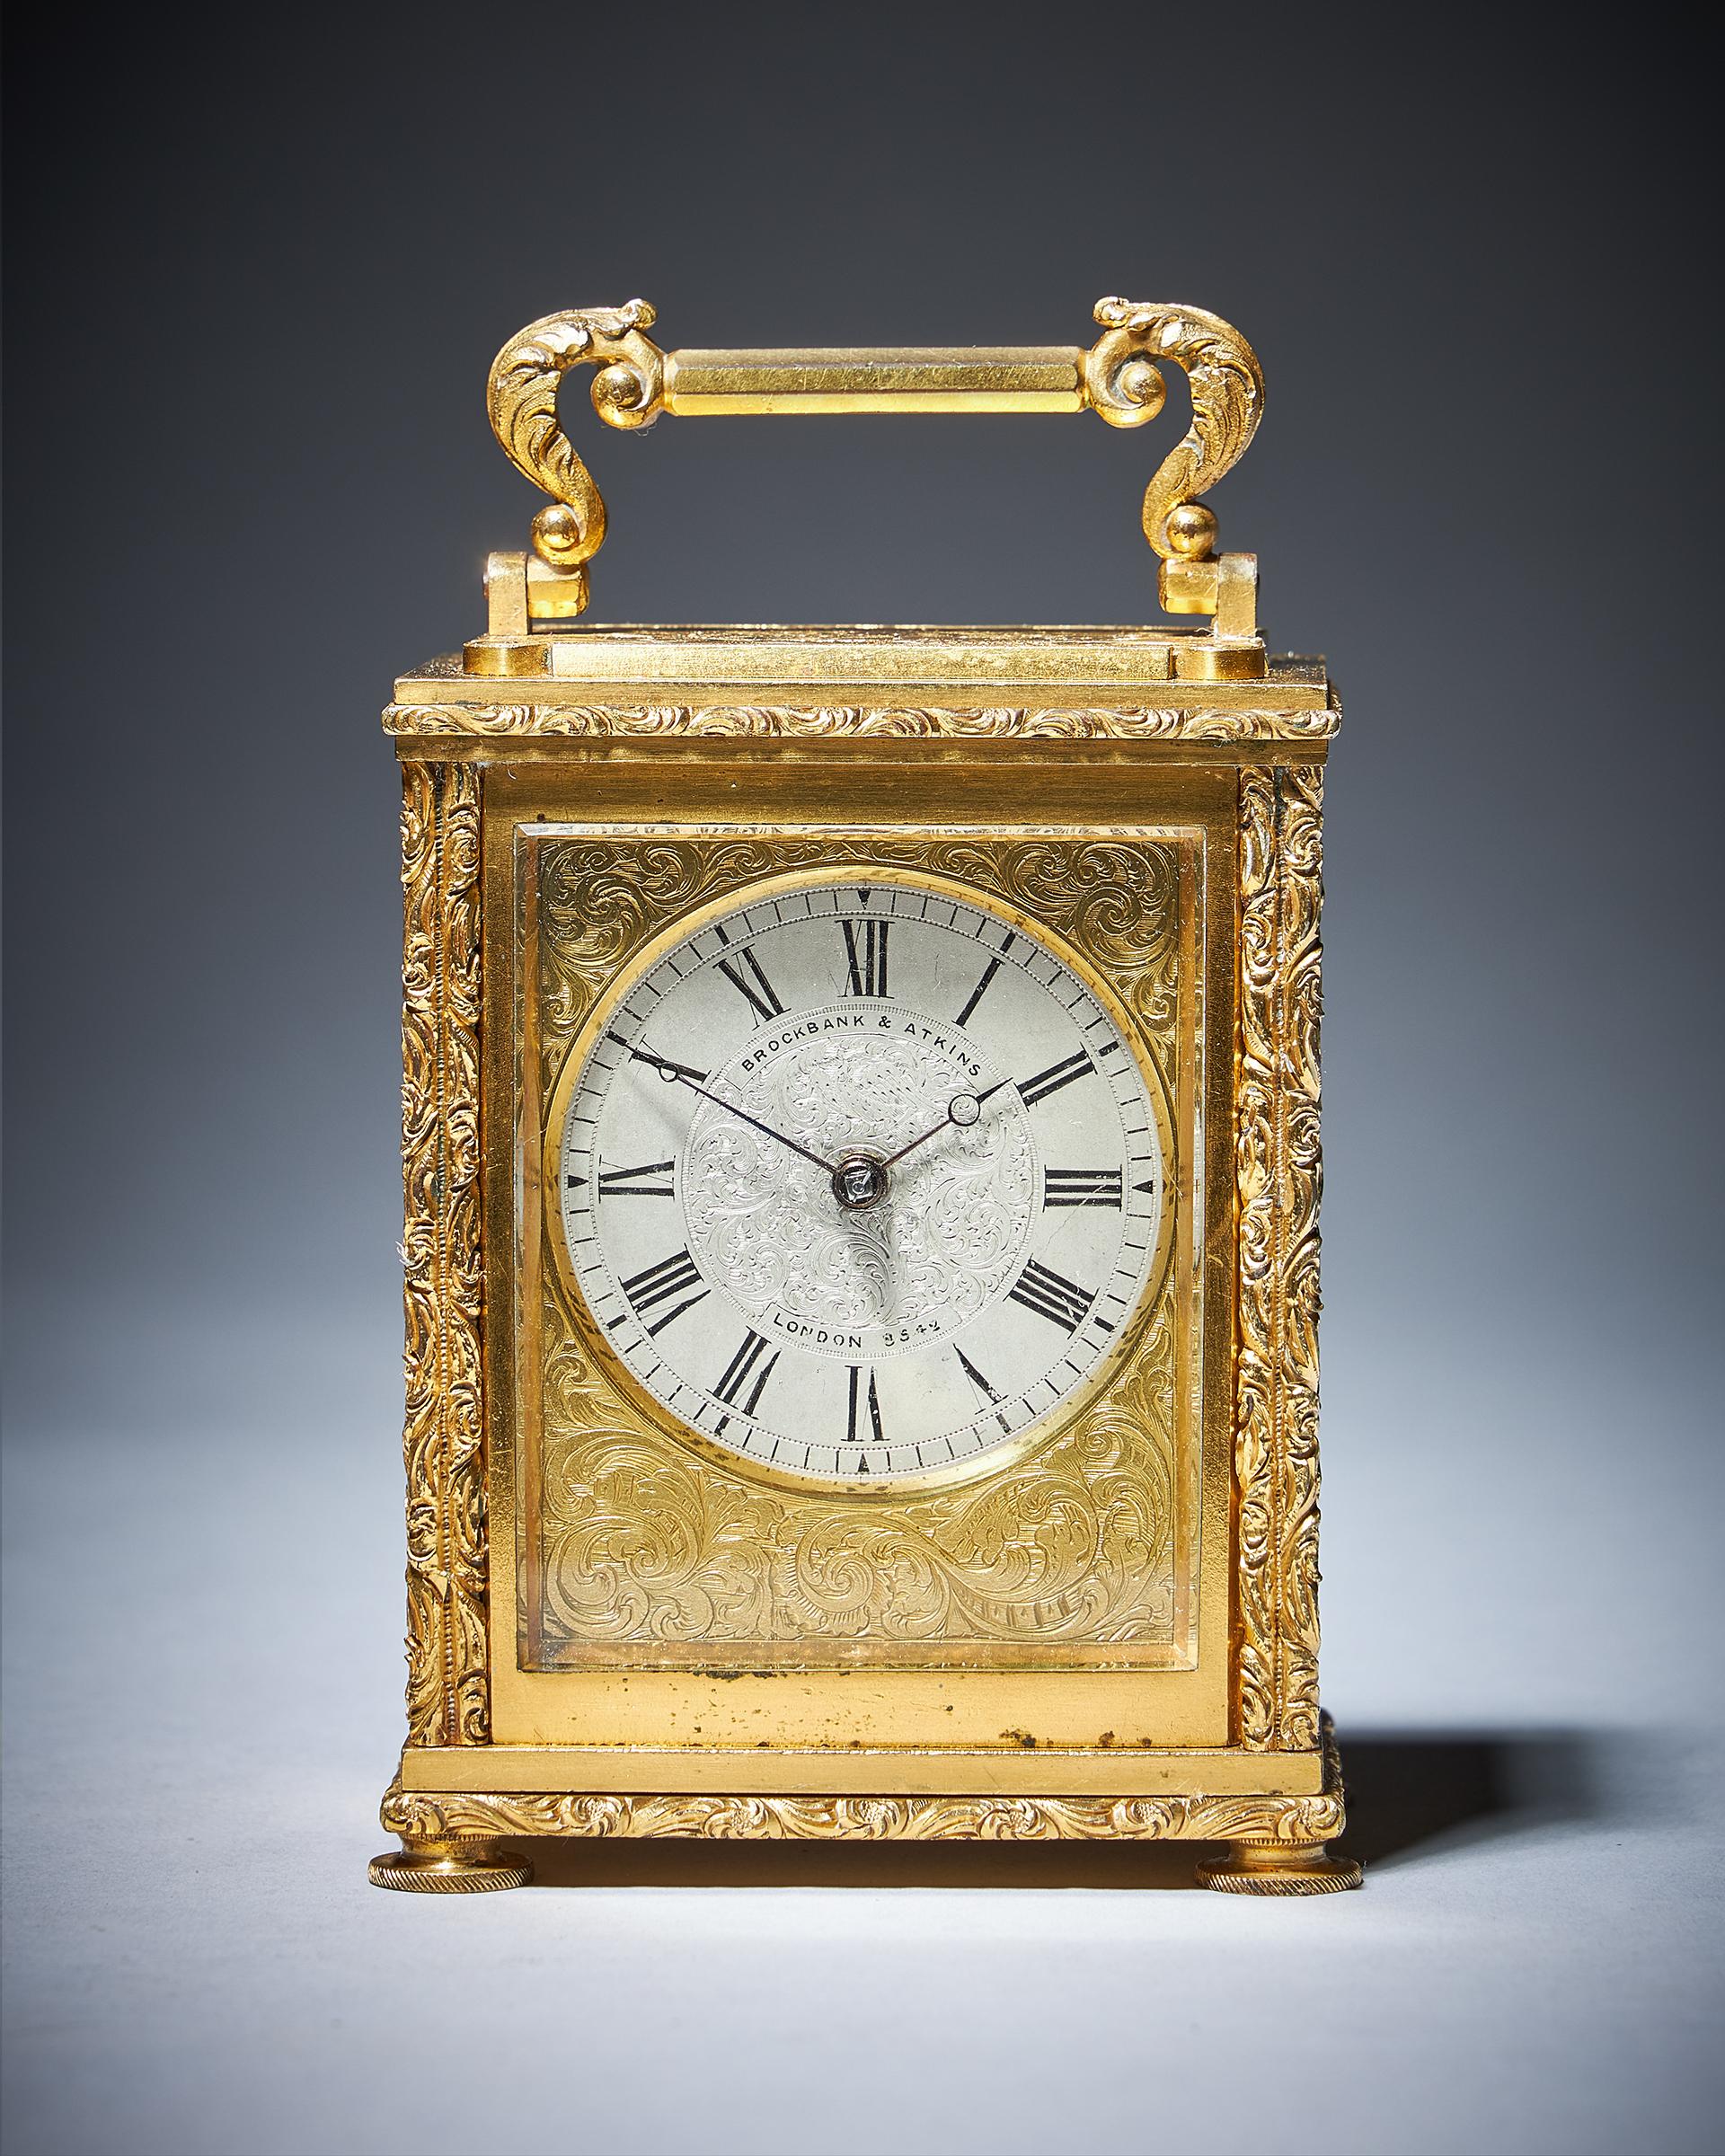 A very rare small nineteenth-century carriage clock signed and numbered on the silvered dial BROCKBANK & ATKINS LONDON 8542, c. 1830-1840. England

The extremely attractive engraved and gilt brass case of small proportions has four chased shaped